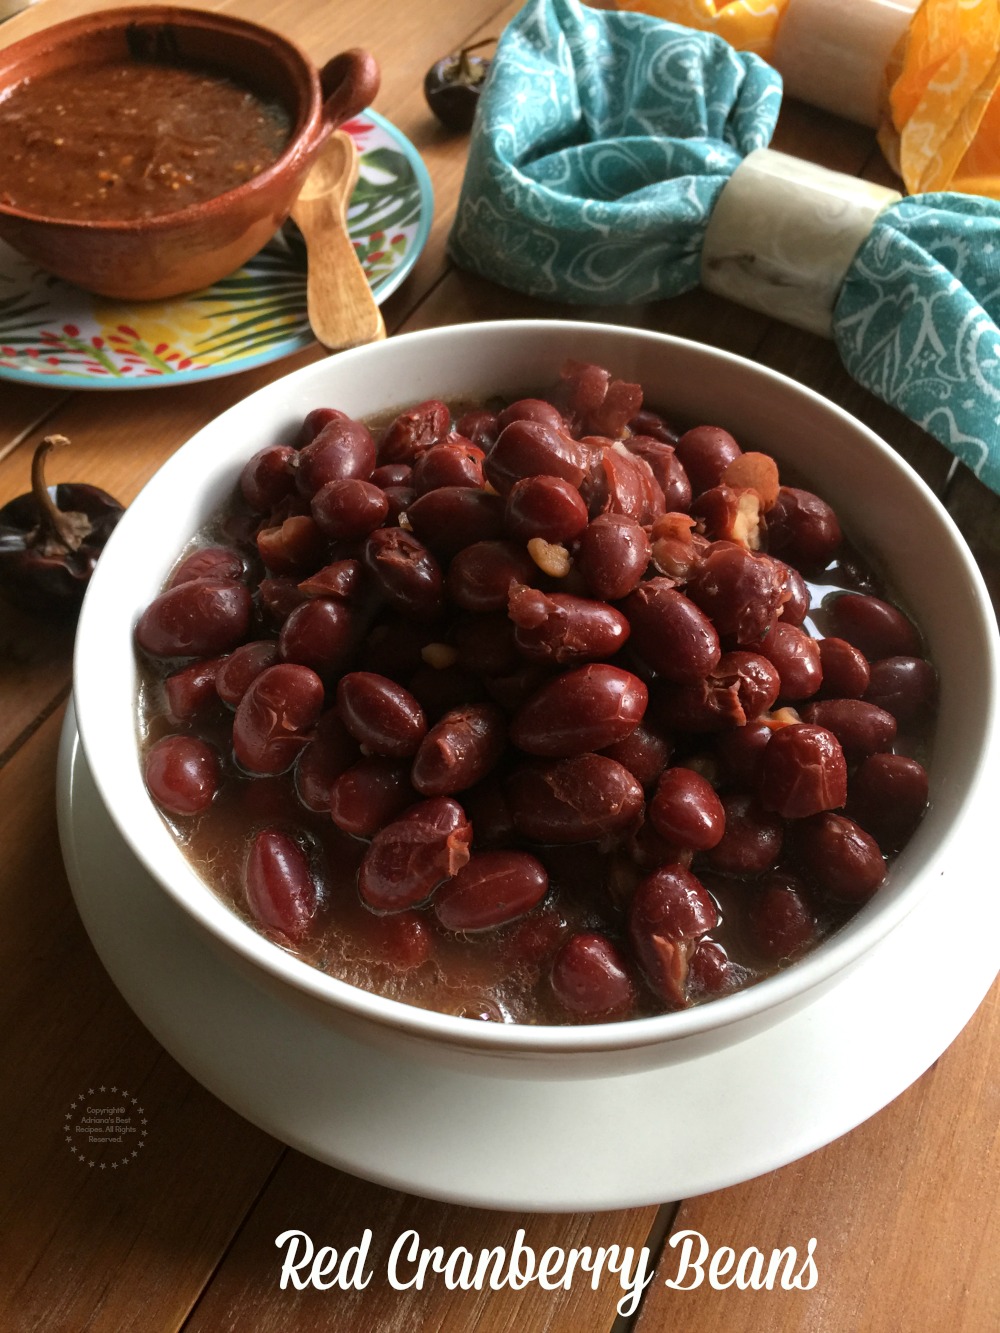 Red cranberry beans Mexican style using the pressure cooker, with onion, garlic, water, oregano, cumin and salt